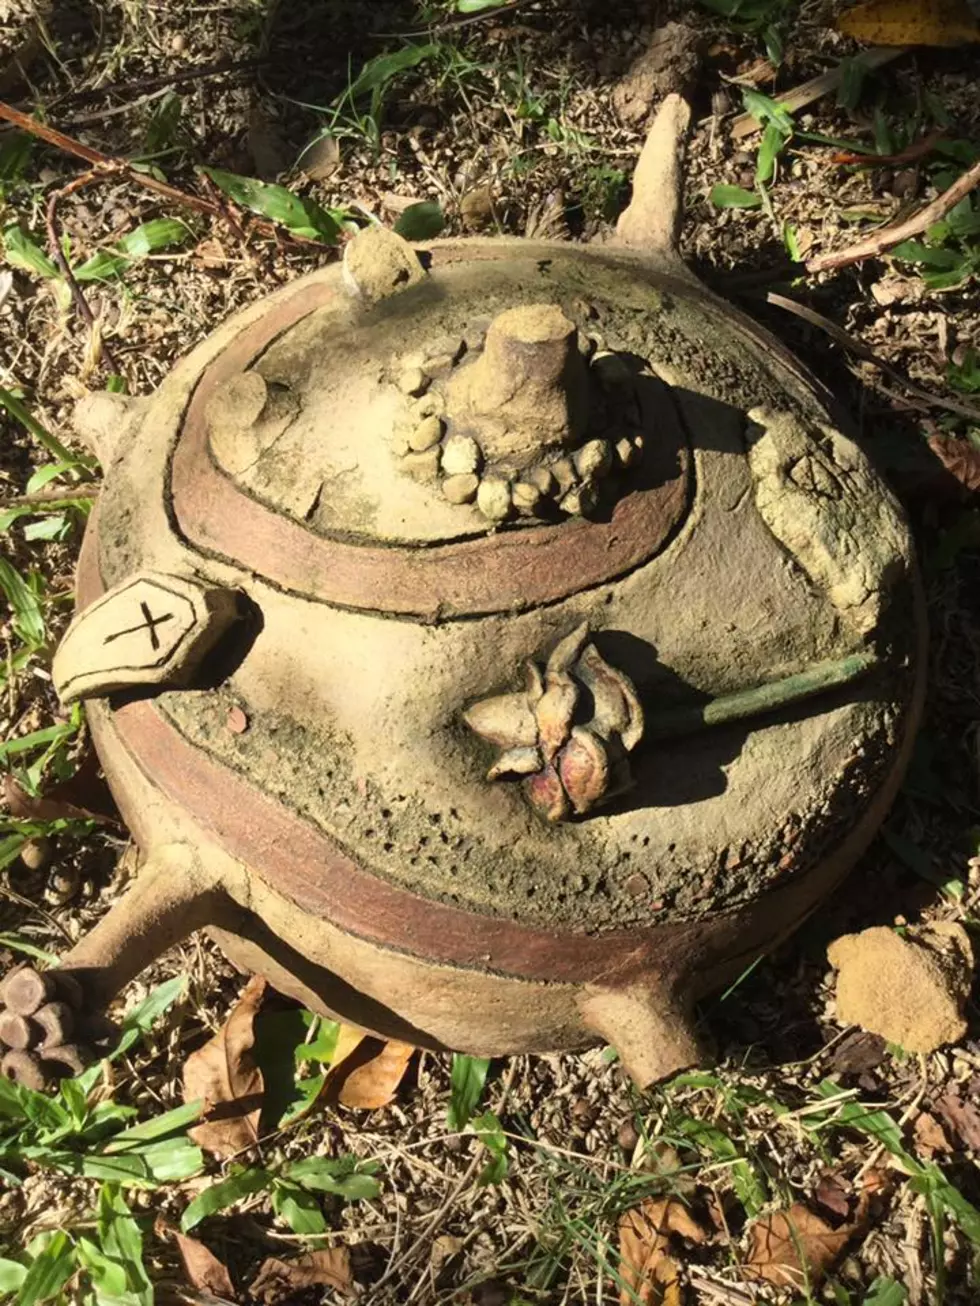 Weird, creepy pottery found in a woman's backyard. What is it?